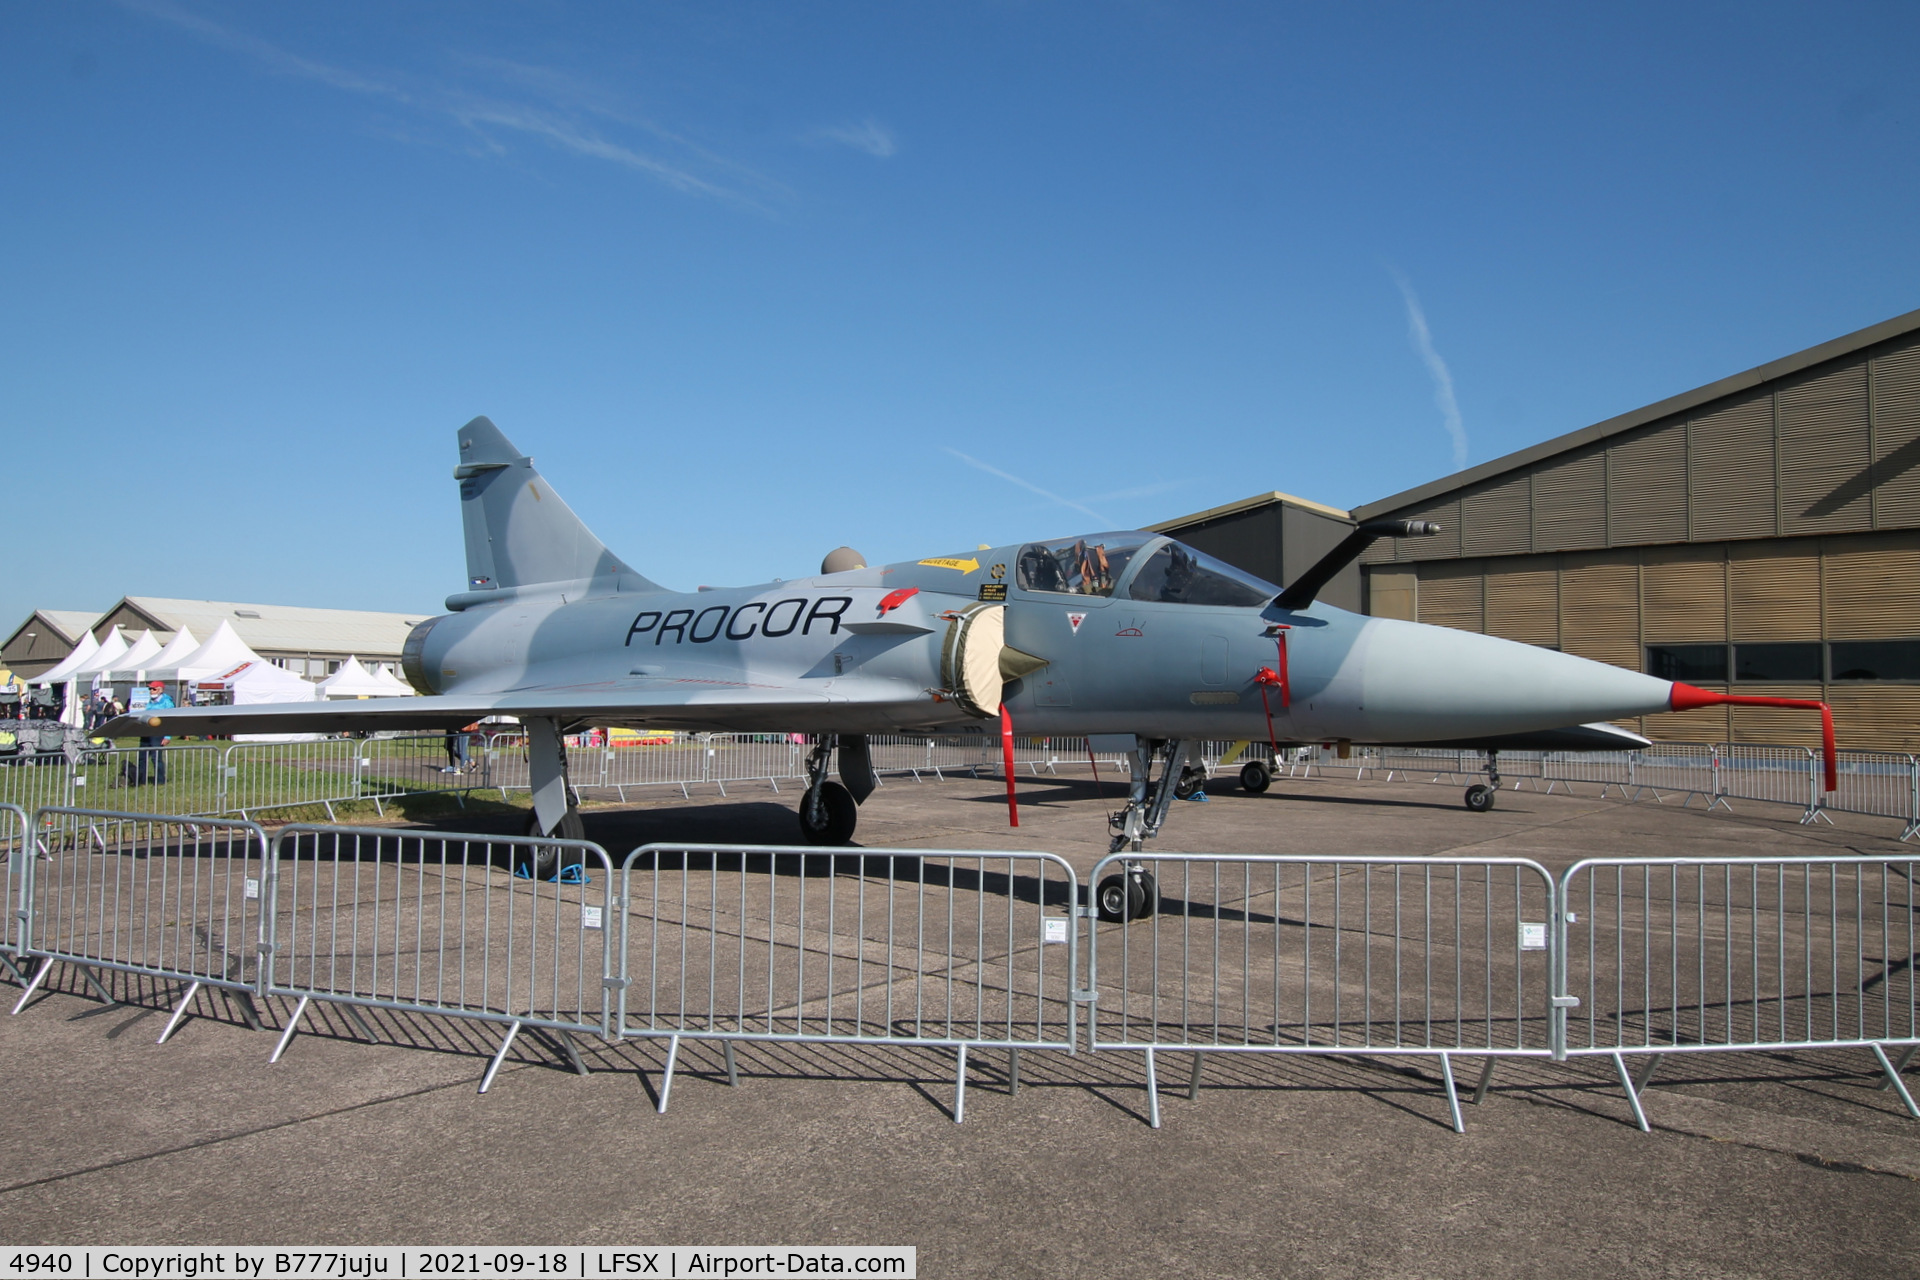 4940, Dassault Mirage F-2000C C/N 78, during Luxeuil Air Show 2021
aquire by PROCOR for Red Air Training but never flight due to no engigne overhall
sold to India for spare part